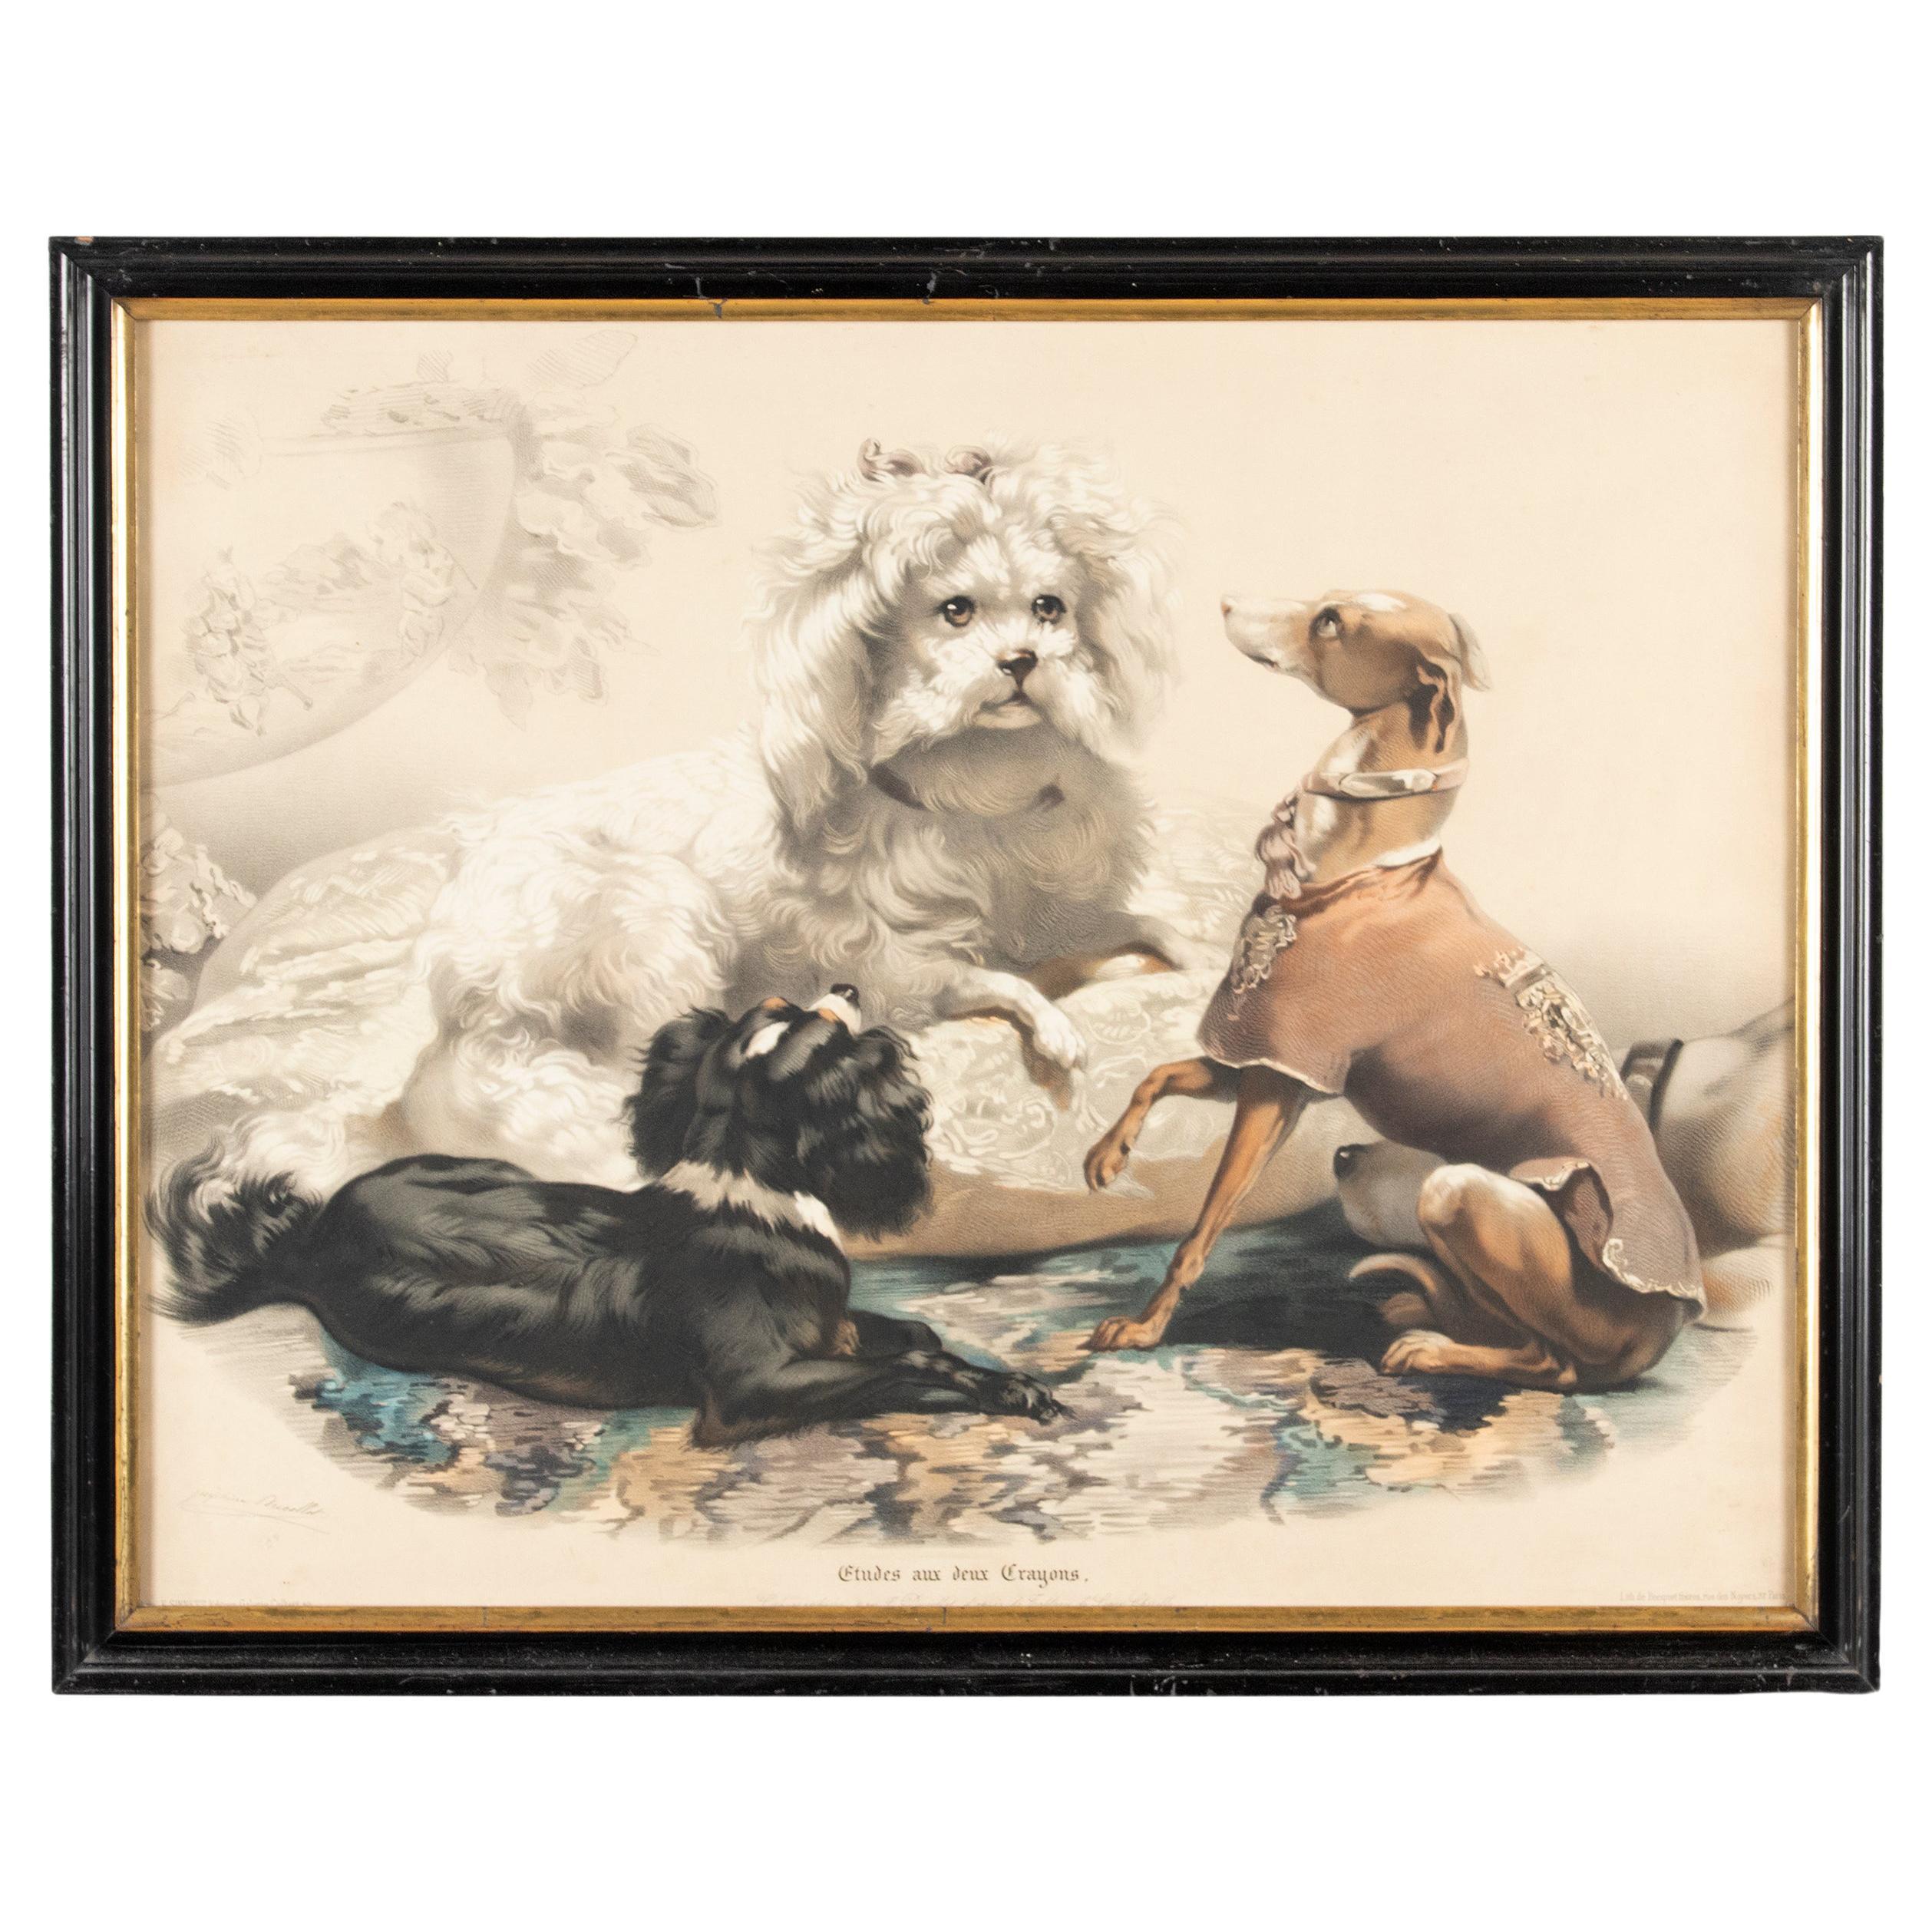 Late 19th Century Lithograph with Dogs, Joséphine Ducollet